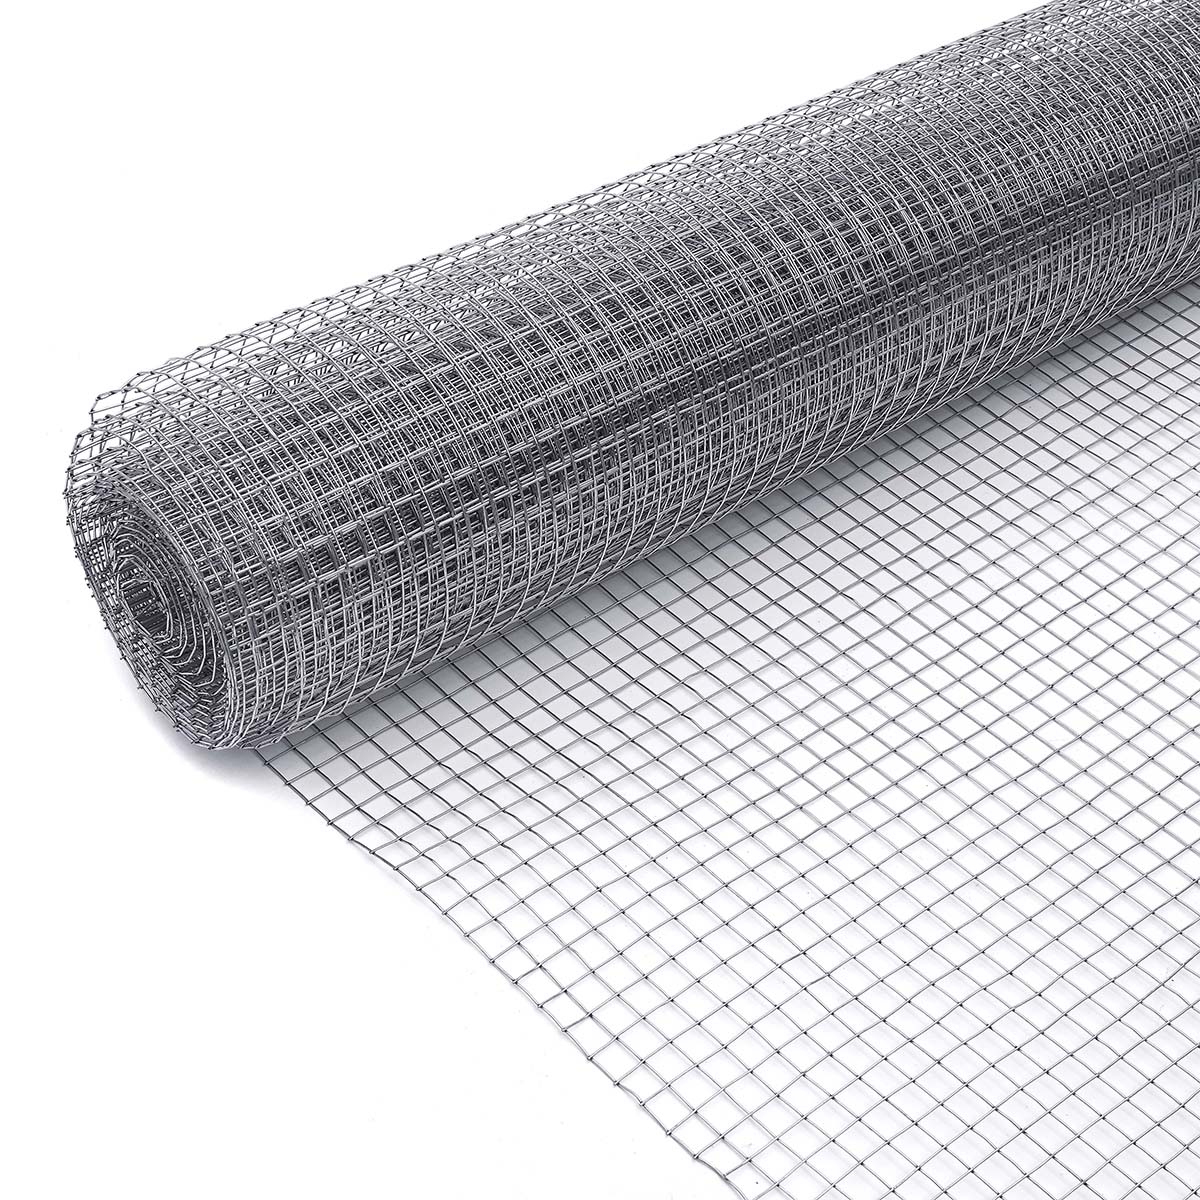 1 2 Mesh 46 X 50 Hardware Cloth 19 Gauge With Hot Dipped Galvanized Materia